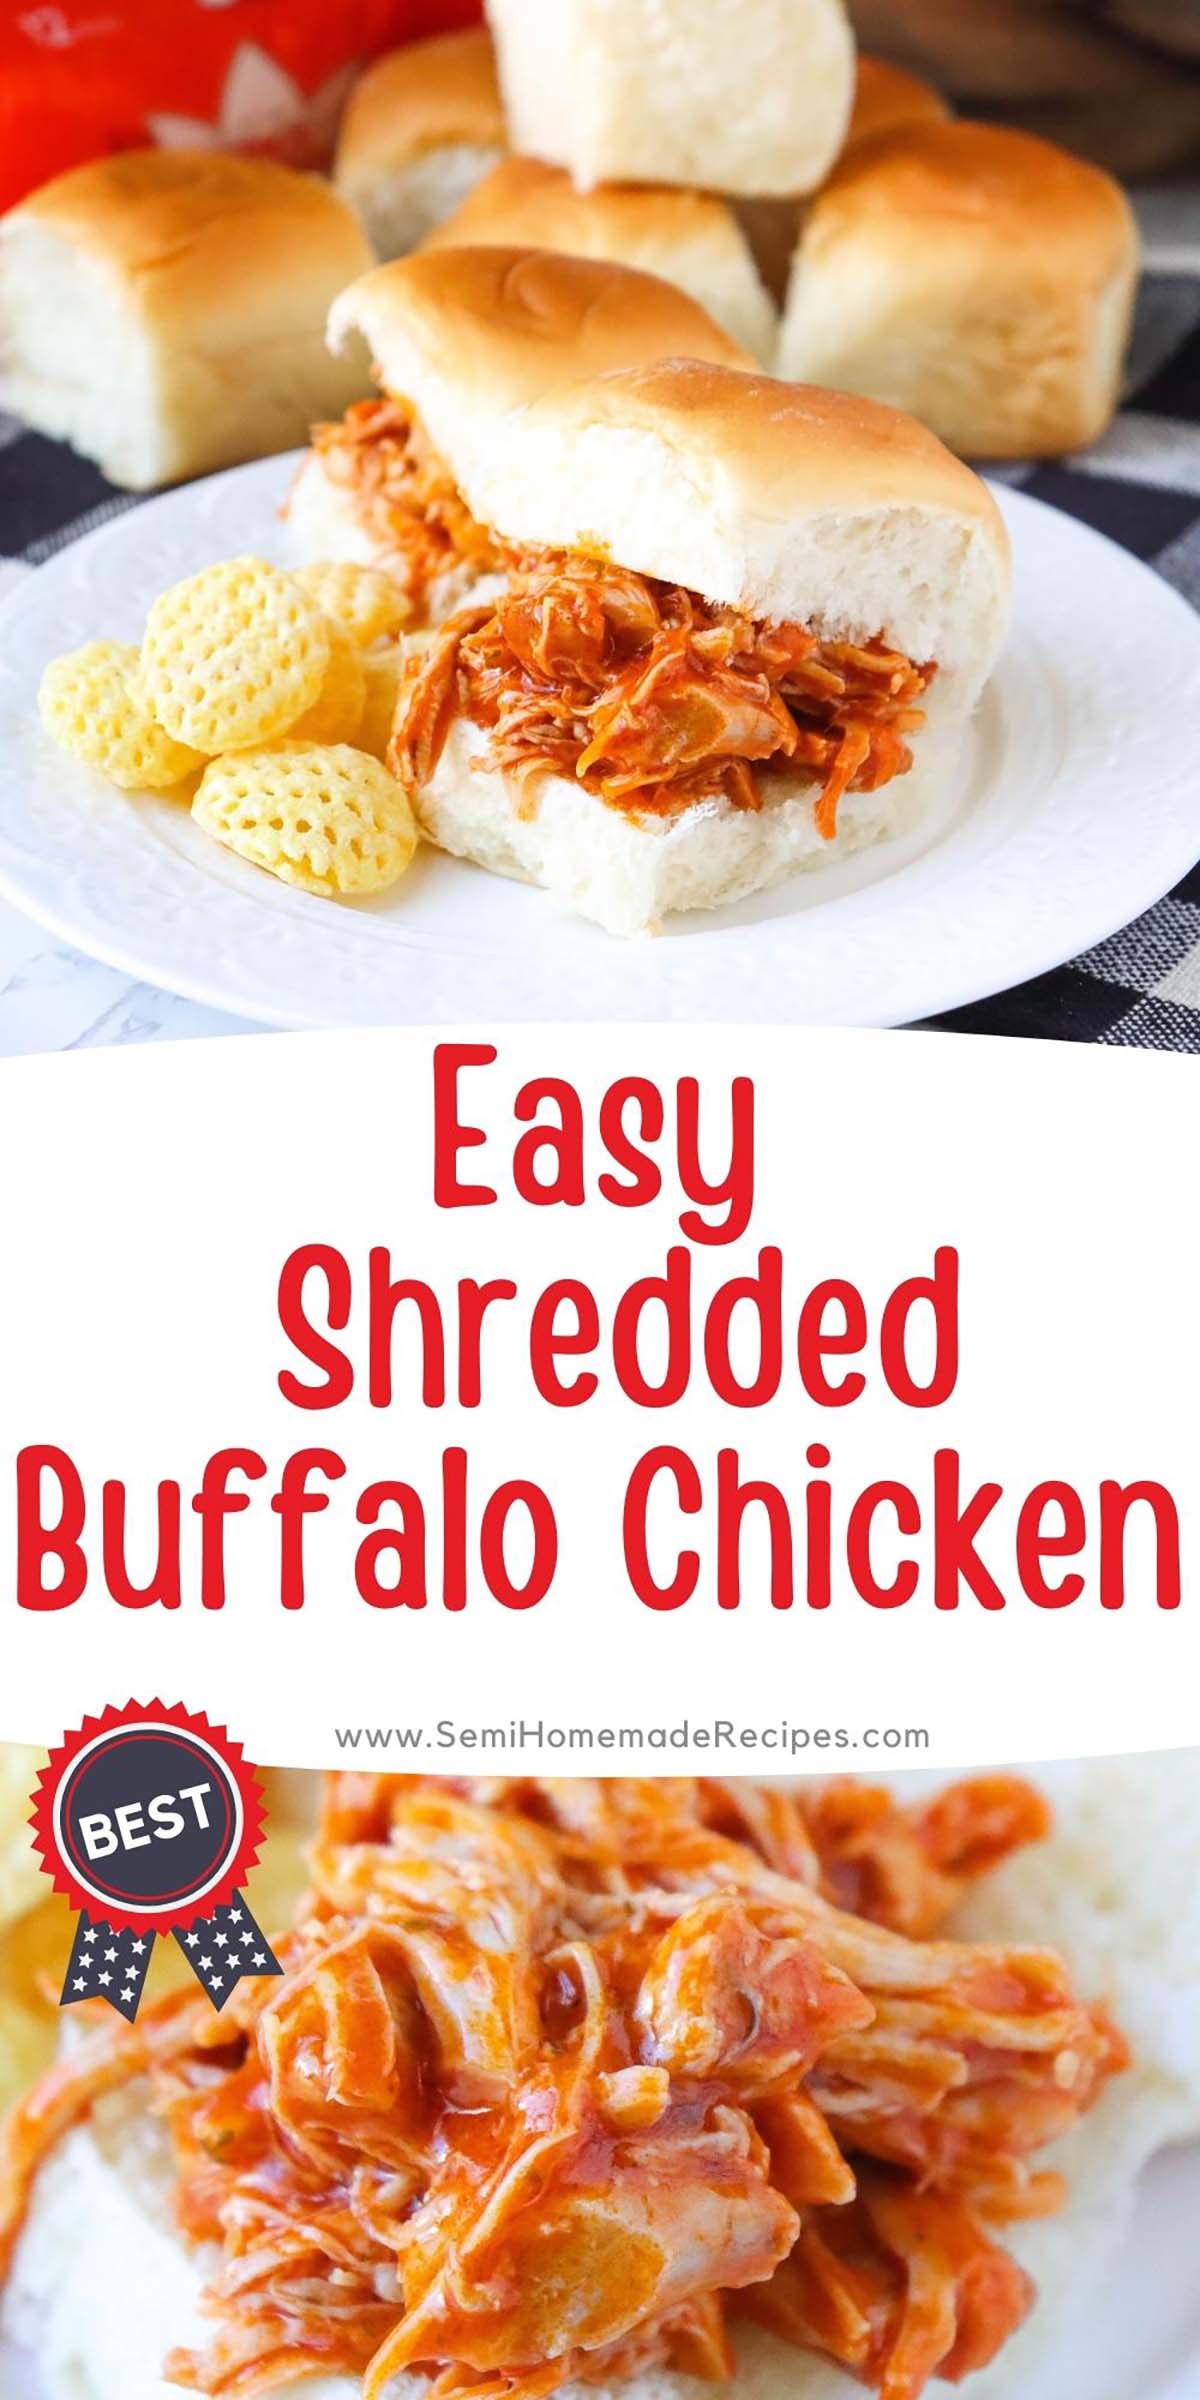 This super Easy Shredded Buffalo Chicken is perfect for sandwiches, sliders or tacos! Turn this stove top Shredded Buffalo Chicken into sliders and top with ranch dressing, lettuce or tomato for the perfect lunch or dinner!